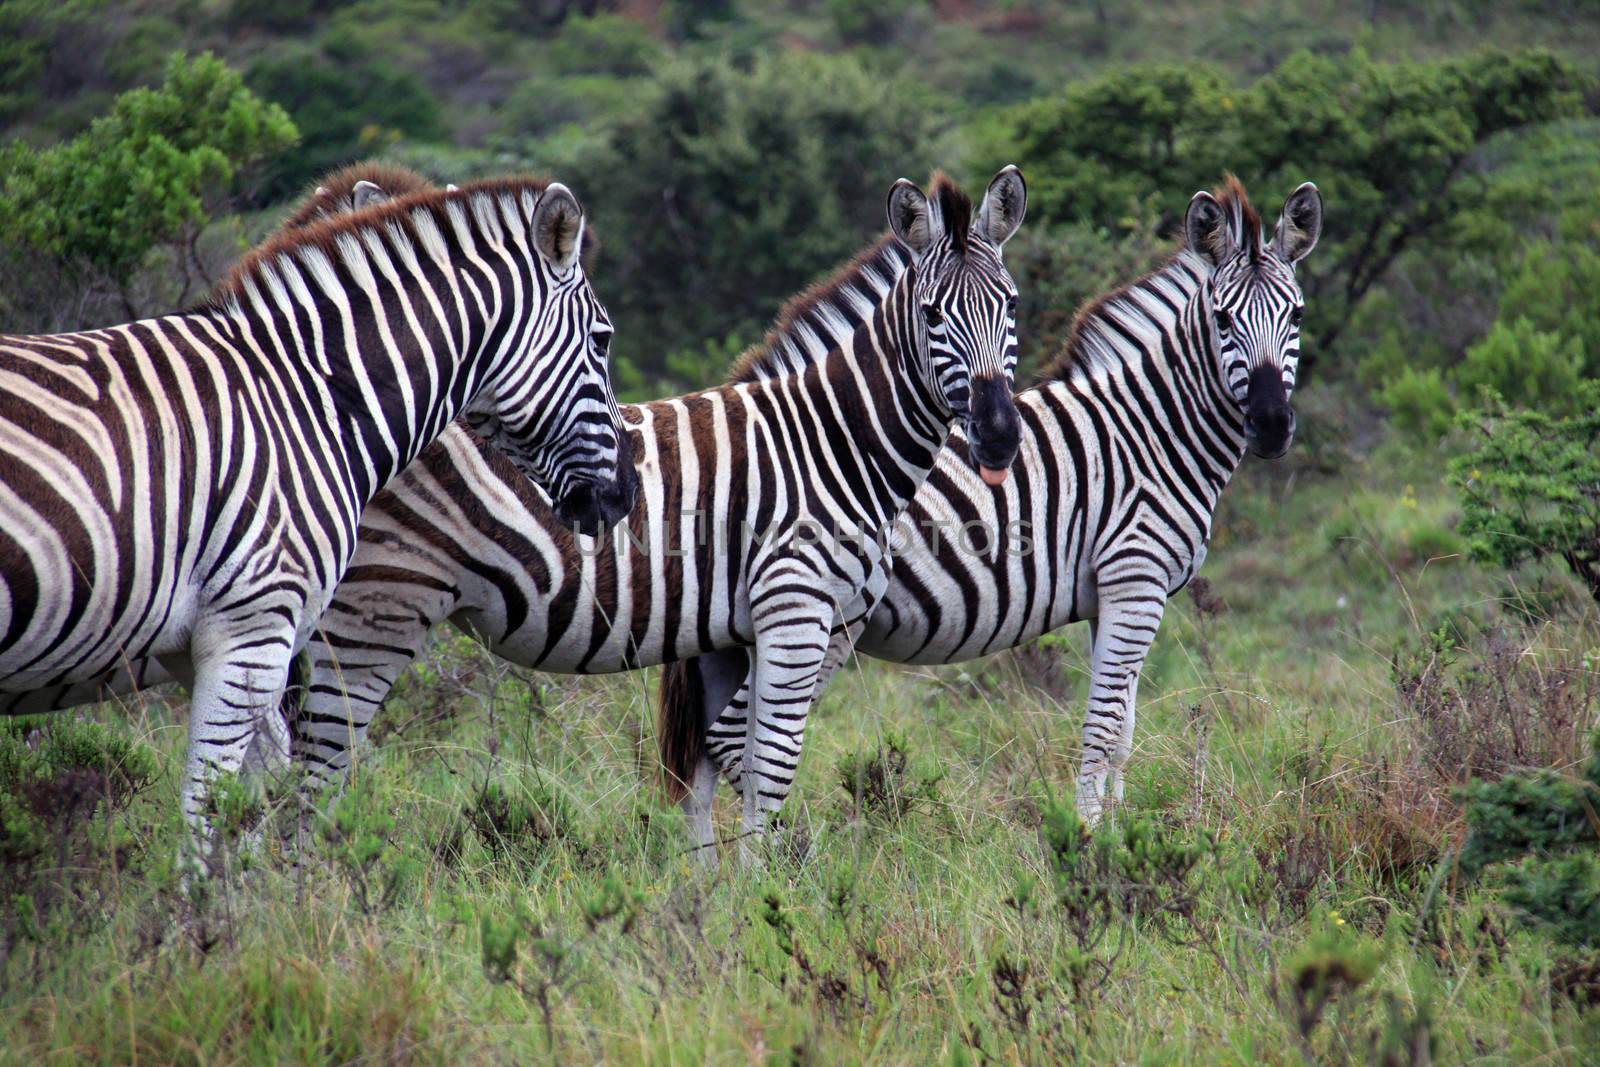 A group of zebra's grassing in Kap River Nature Reserve, South Africa